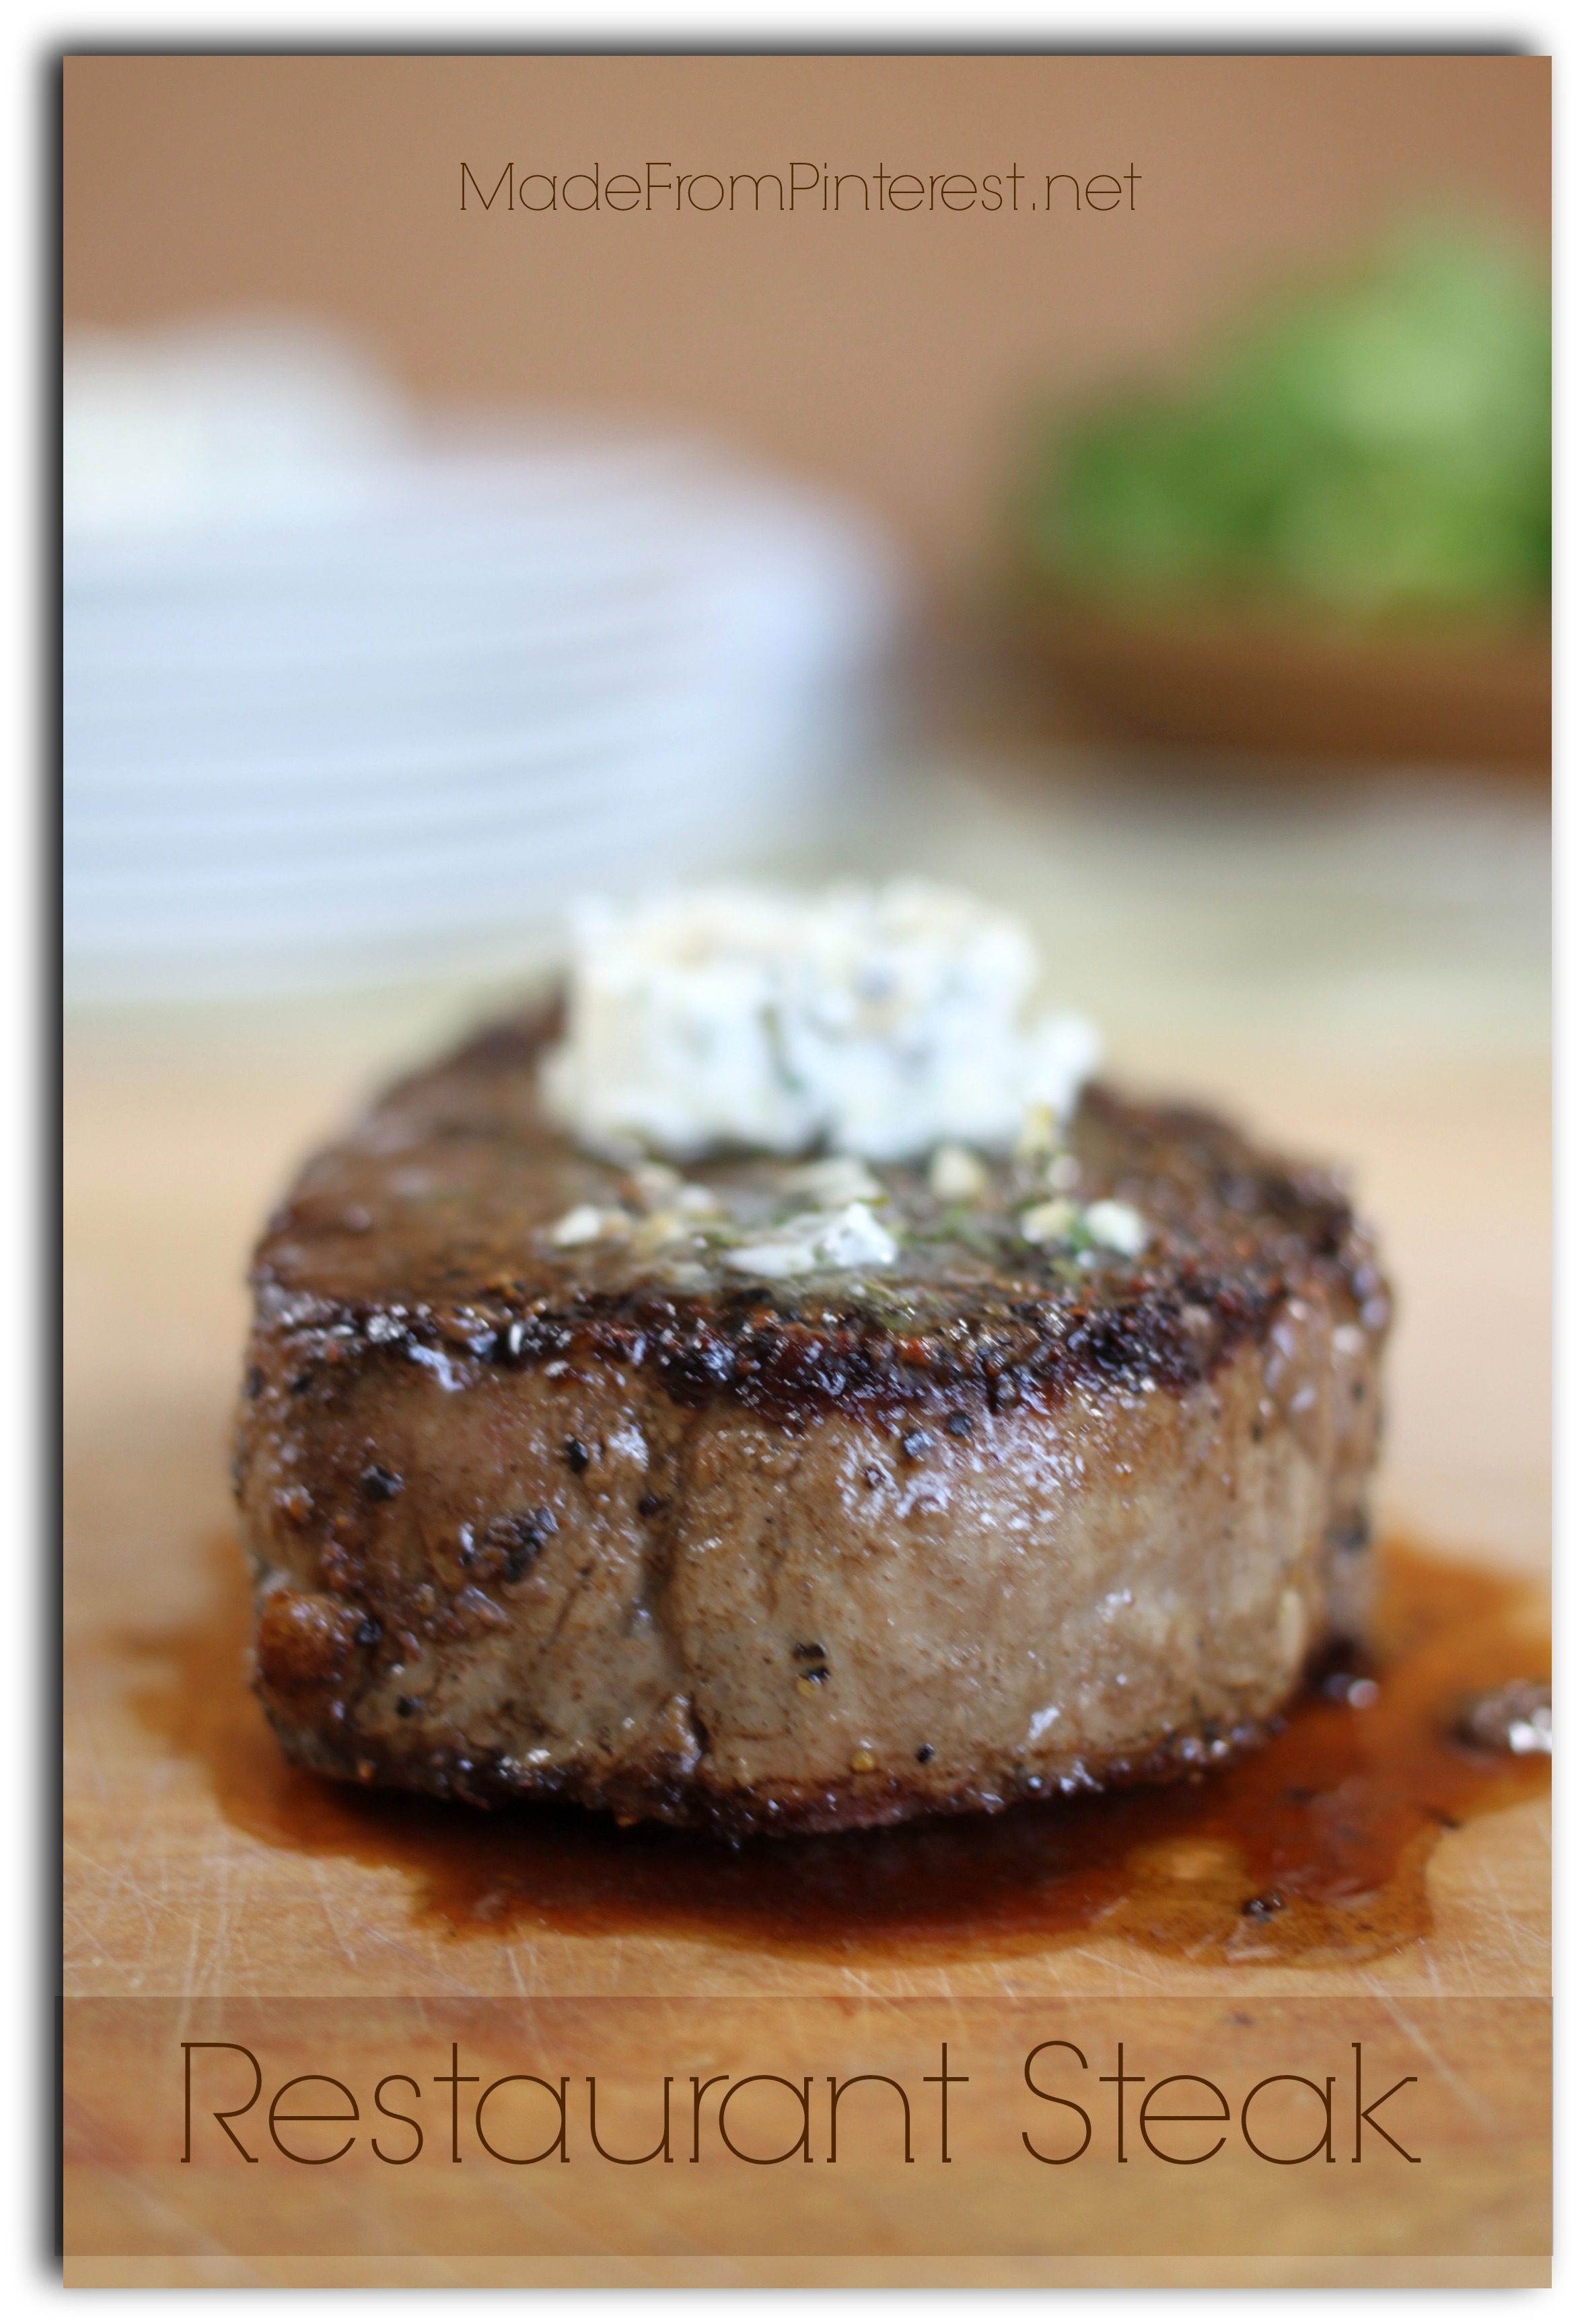 Restaurant Steak - 15 minutes for a steak that rivals any restaurant. Hubby said it was better than any steak he had ever had on the grill! Make this for your sweetheart on Valentine's Day and they will love you extra!